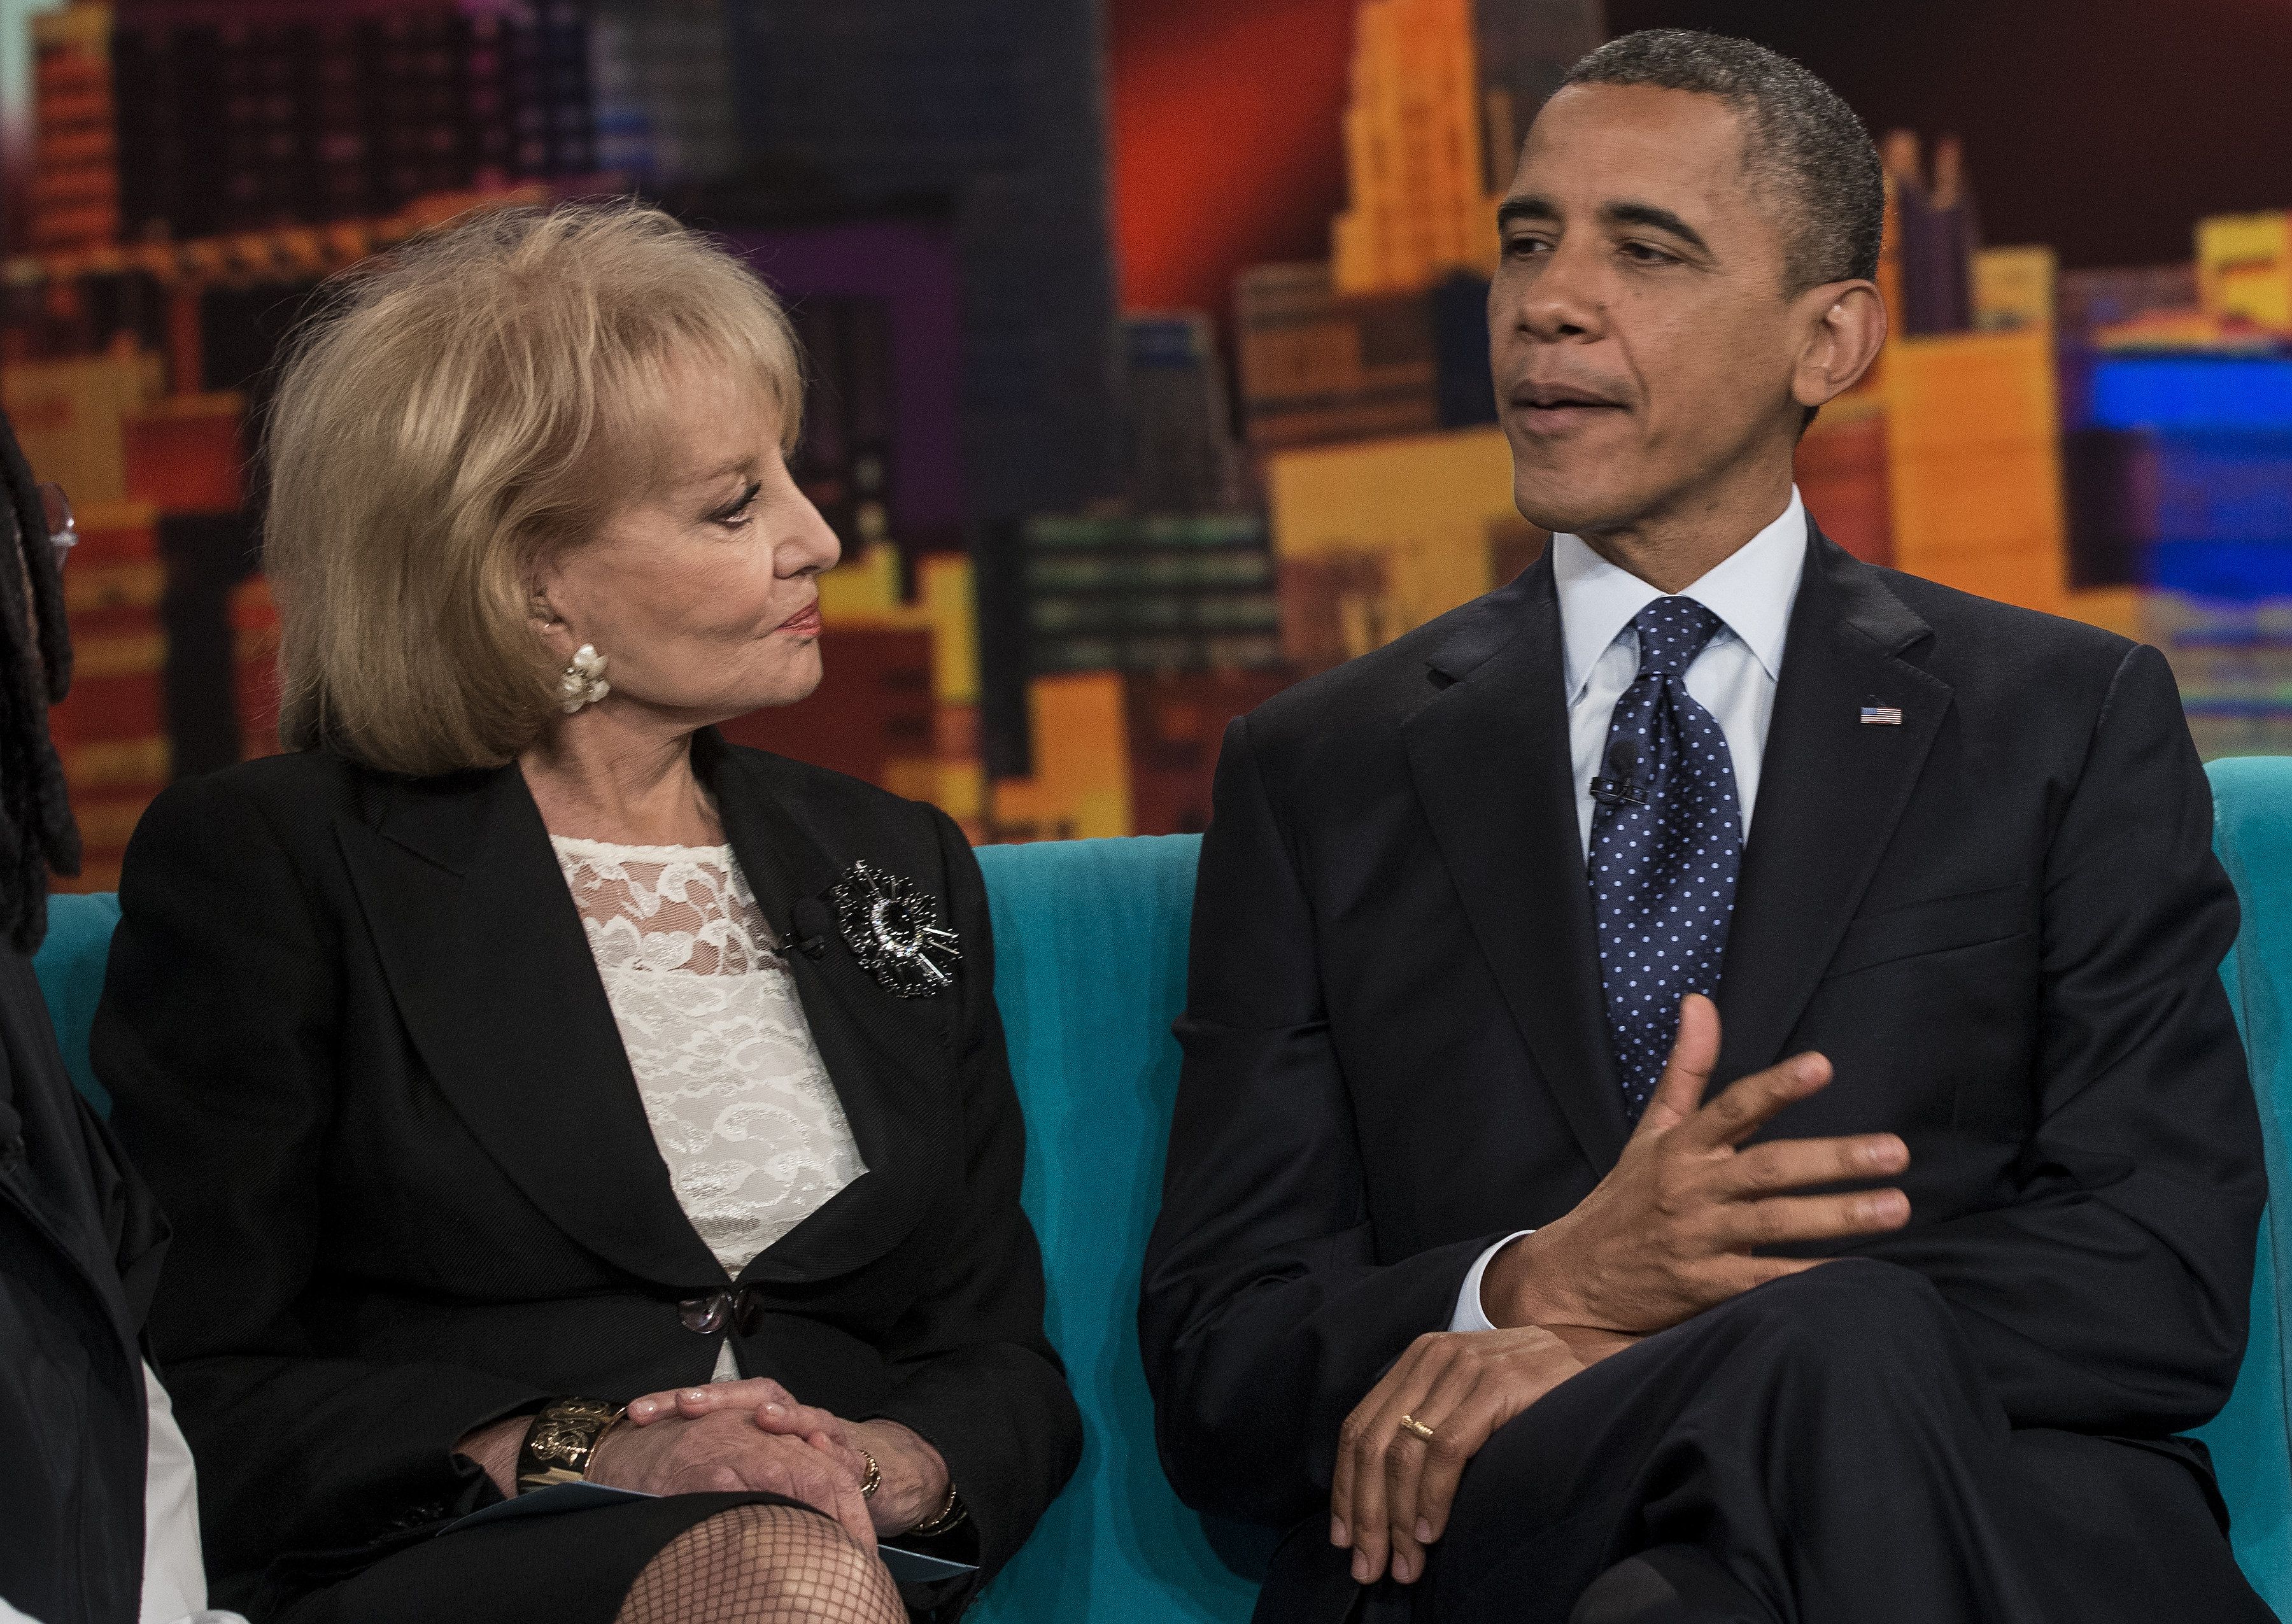 Barbara Walters listens as US President Barack Obama speaks during a break in a taping of "The View" at ABC Studios September 24, 2012 in New York, New York.